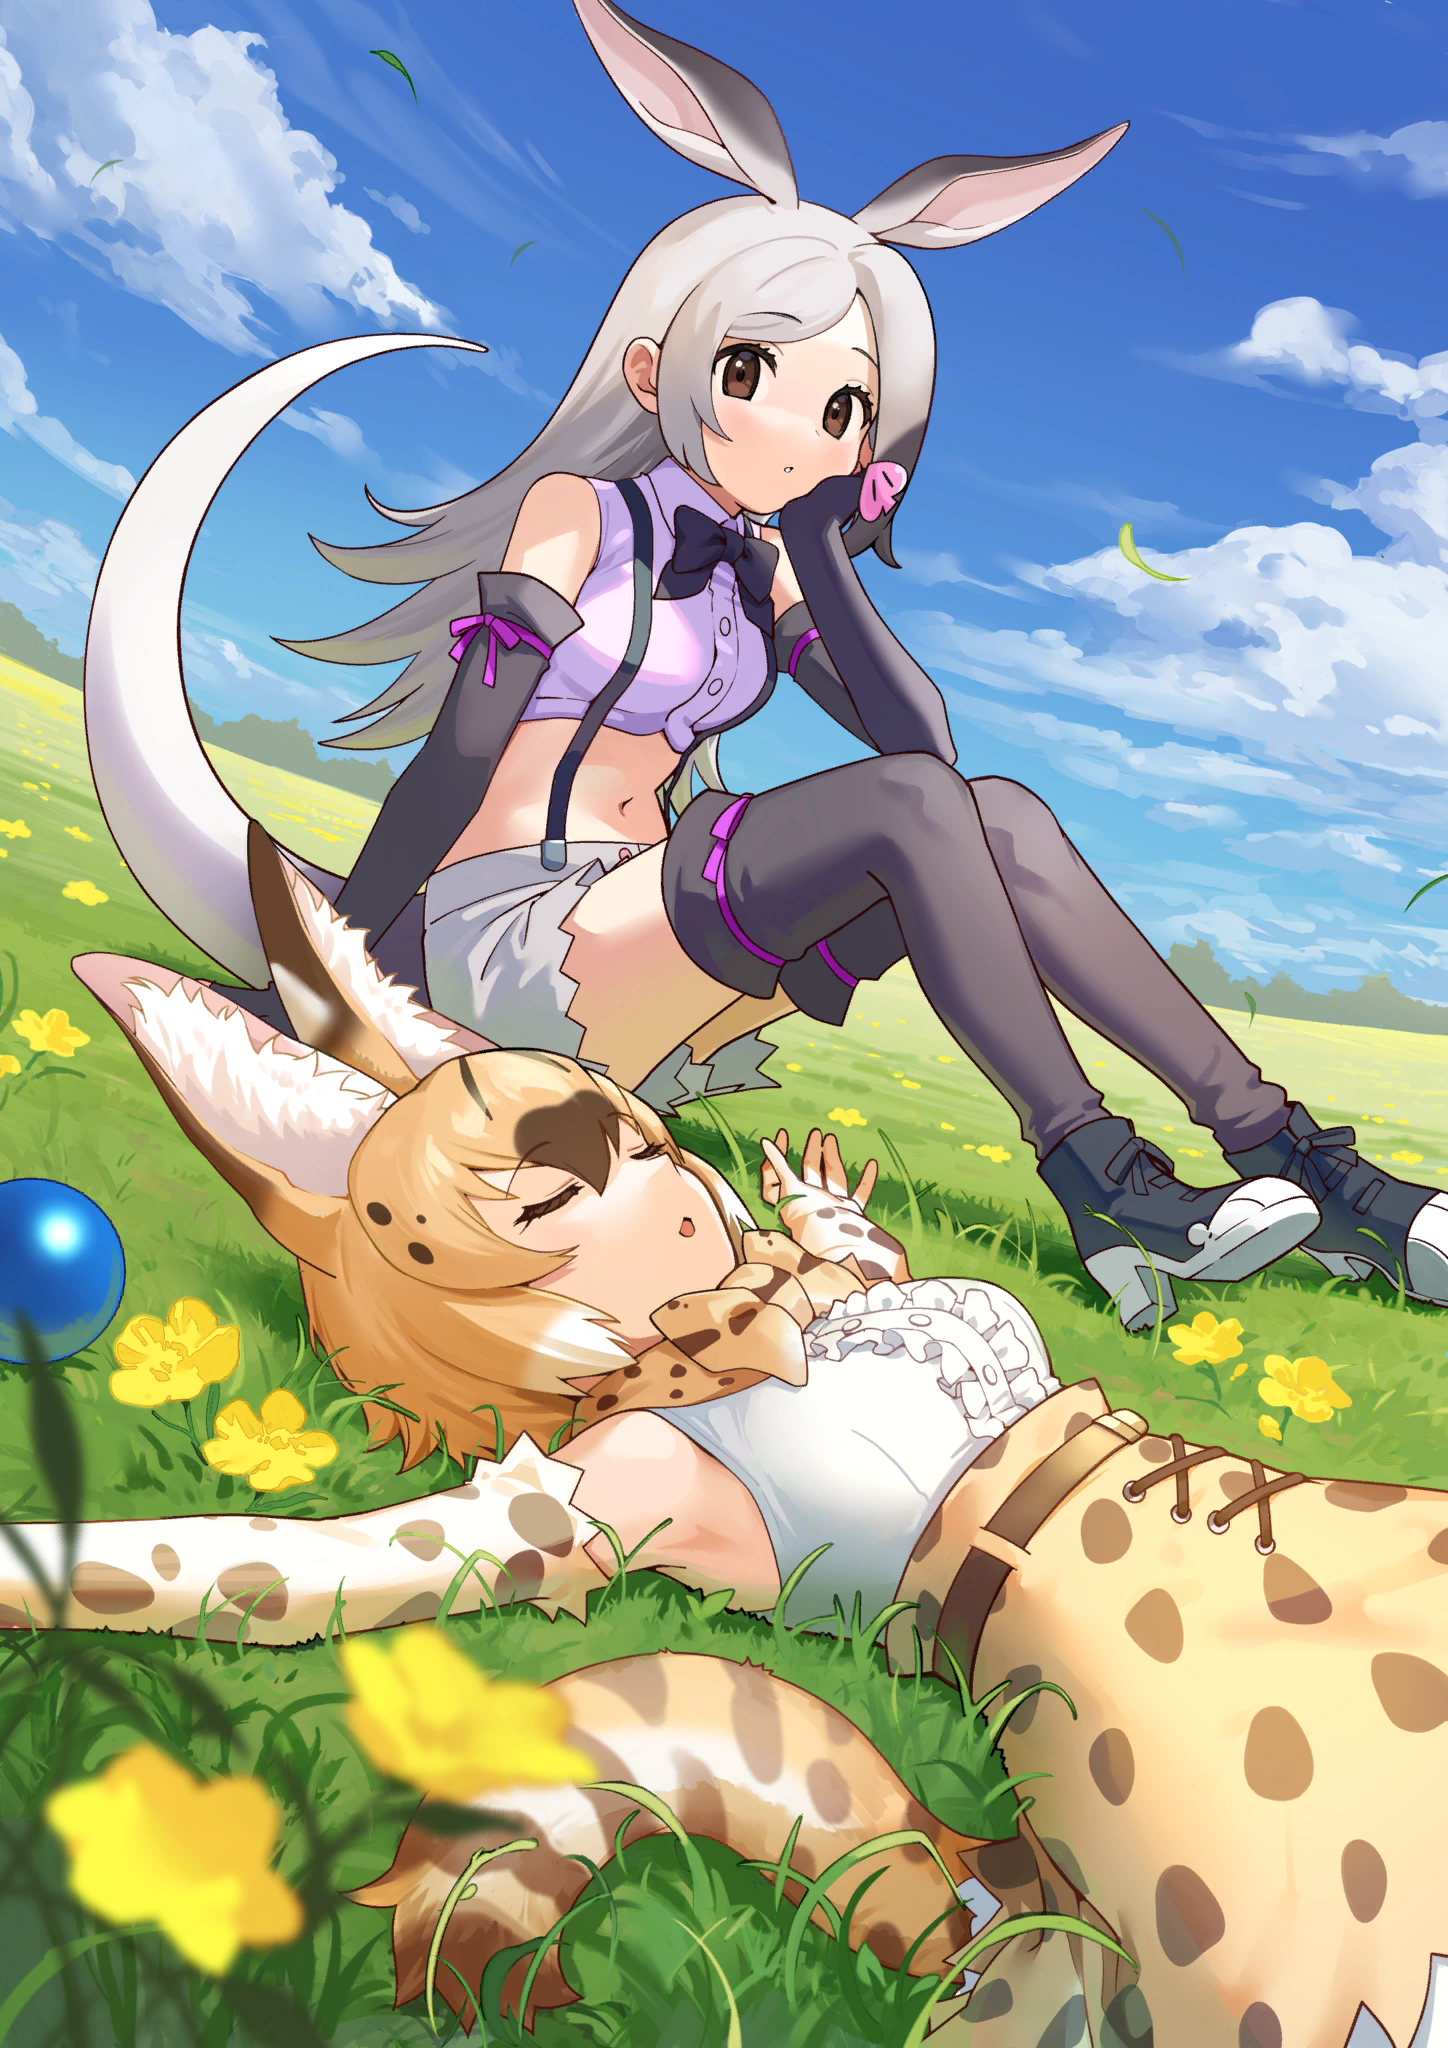 Photo "Nonhoi Even At Dusk" from Kemono Friends 3.